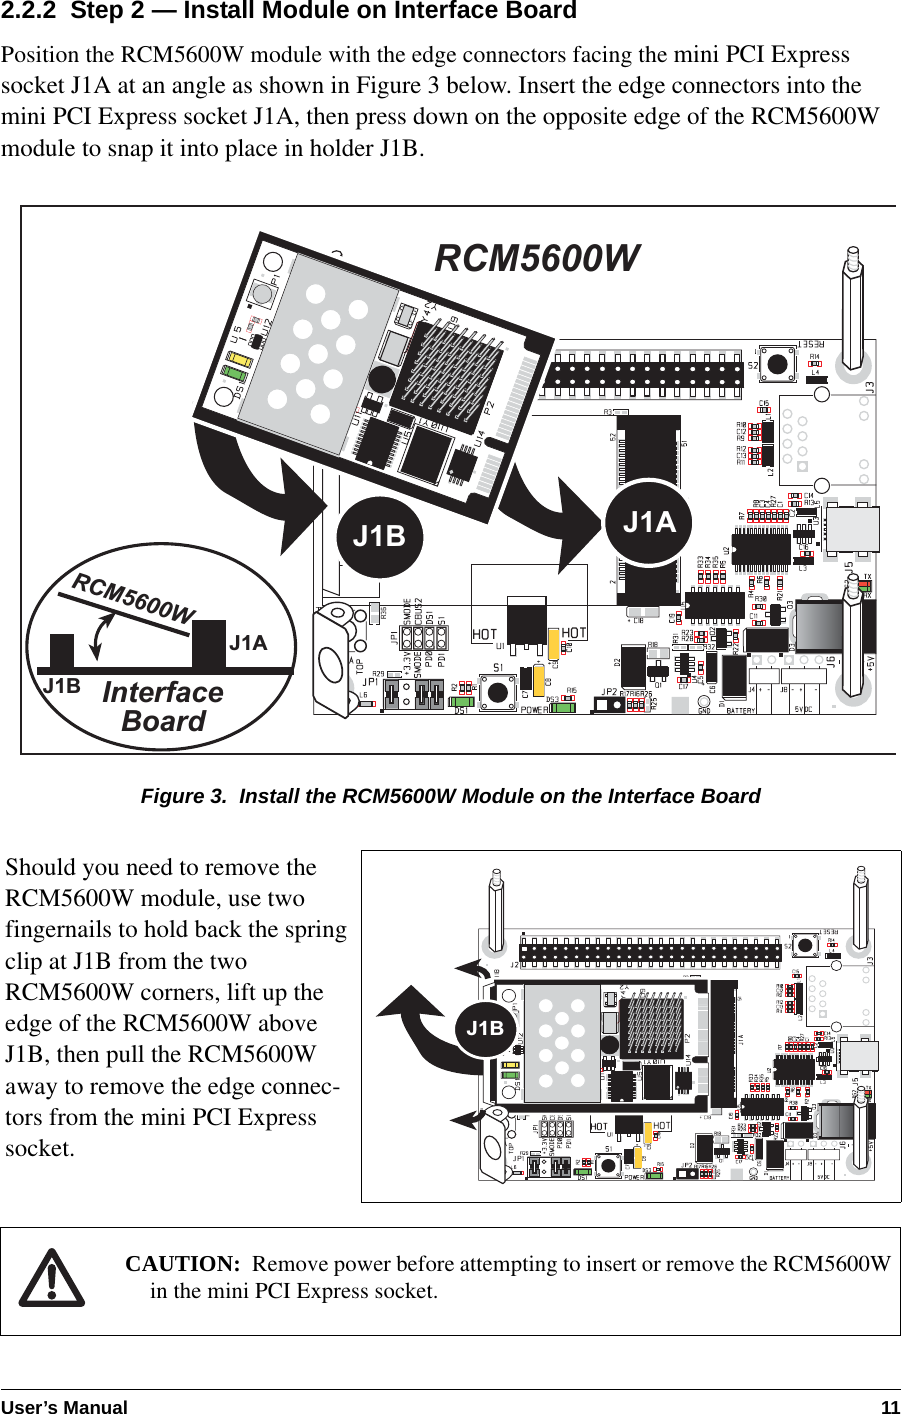 User’s Manual 112.2.2  Step 2 — Install Module on Interface BoardPosition the RCM5600W module with the edge connectors facing the mini PCI Express socket J1A at an angle as shown in Figure 3 below. Insert the edge connectors into the mini PCI Express socket J1A, then press down on the opposite edge of the RCM5600W module to snap it into place in holder J1B.Figure 3.  Install the RCM5600W Module on the Interface BoardShould you need to remove the RCM5600W module, use two fingernails to hold back the spring clip at J1B from the two RCM5600W corners, lift up the edge of the RCM5600W above J1B, then pull the RCM5600W away to remove the edge connec-tors from the mini PCI Express socket.CAUTION: Remove power before attempting to insert or remove the RCM5600W in the mini PCI Express socket.InterfaceBoardJ1AJ1BJ1BRCM5600WRCM5600WJ1AJ1B